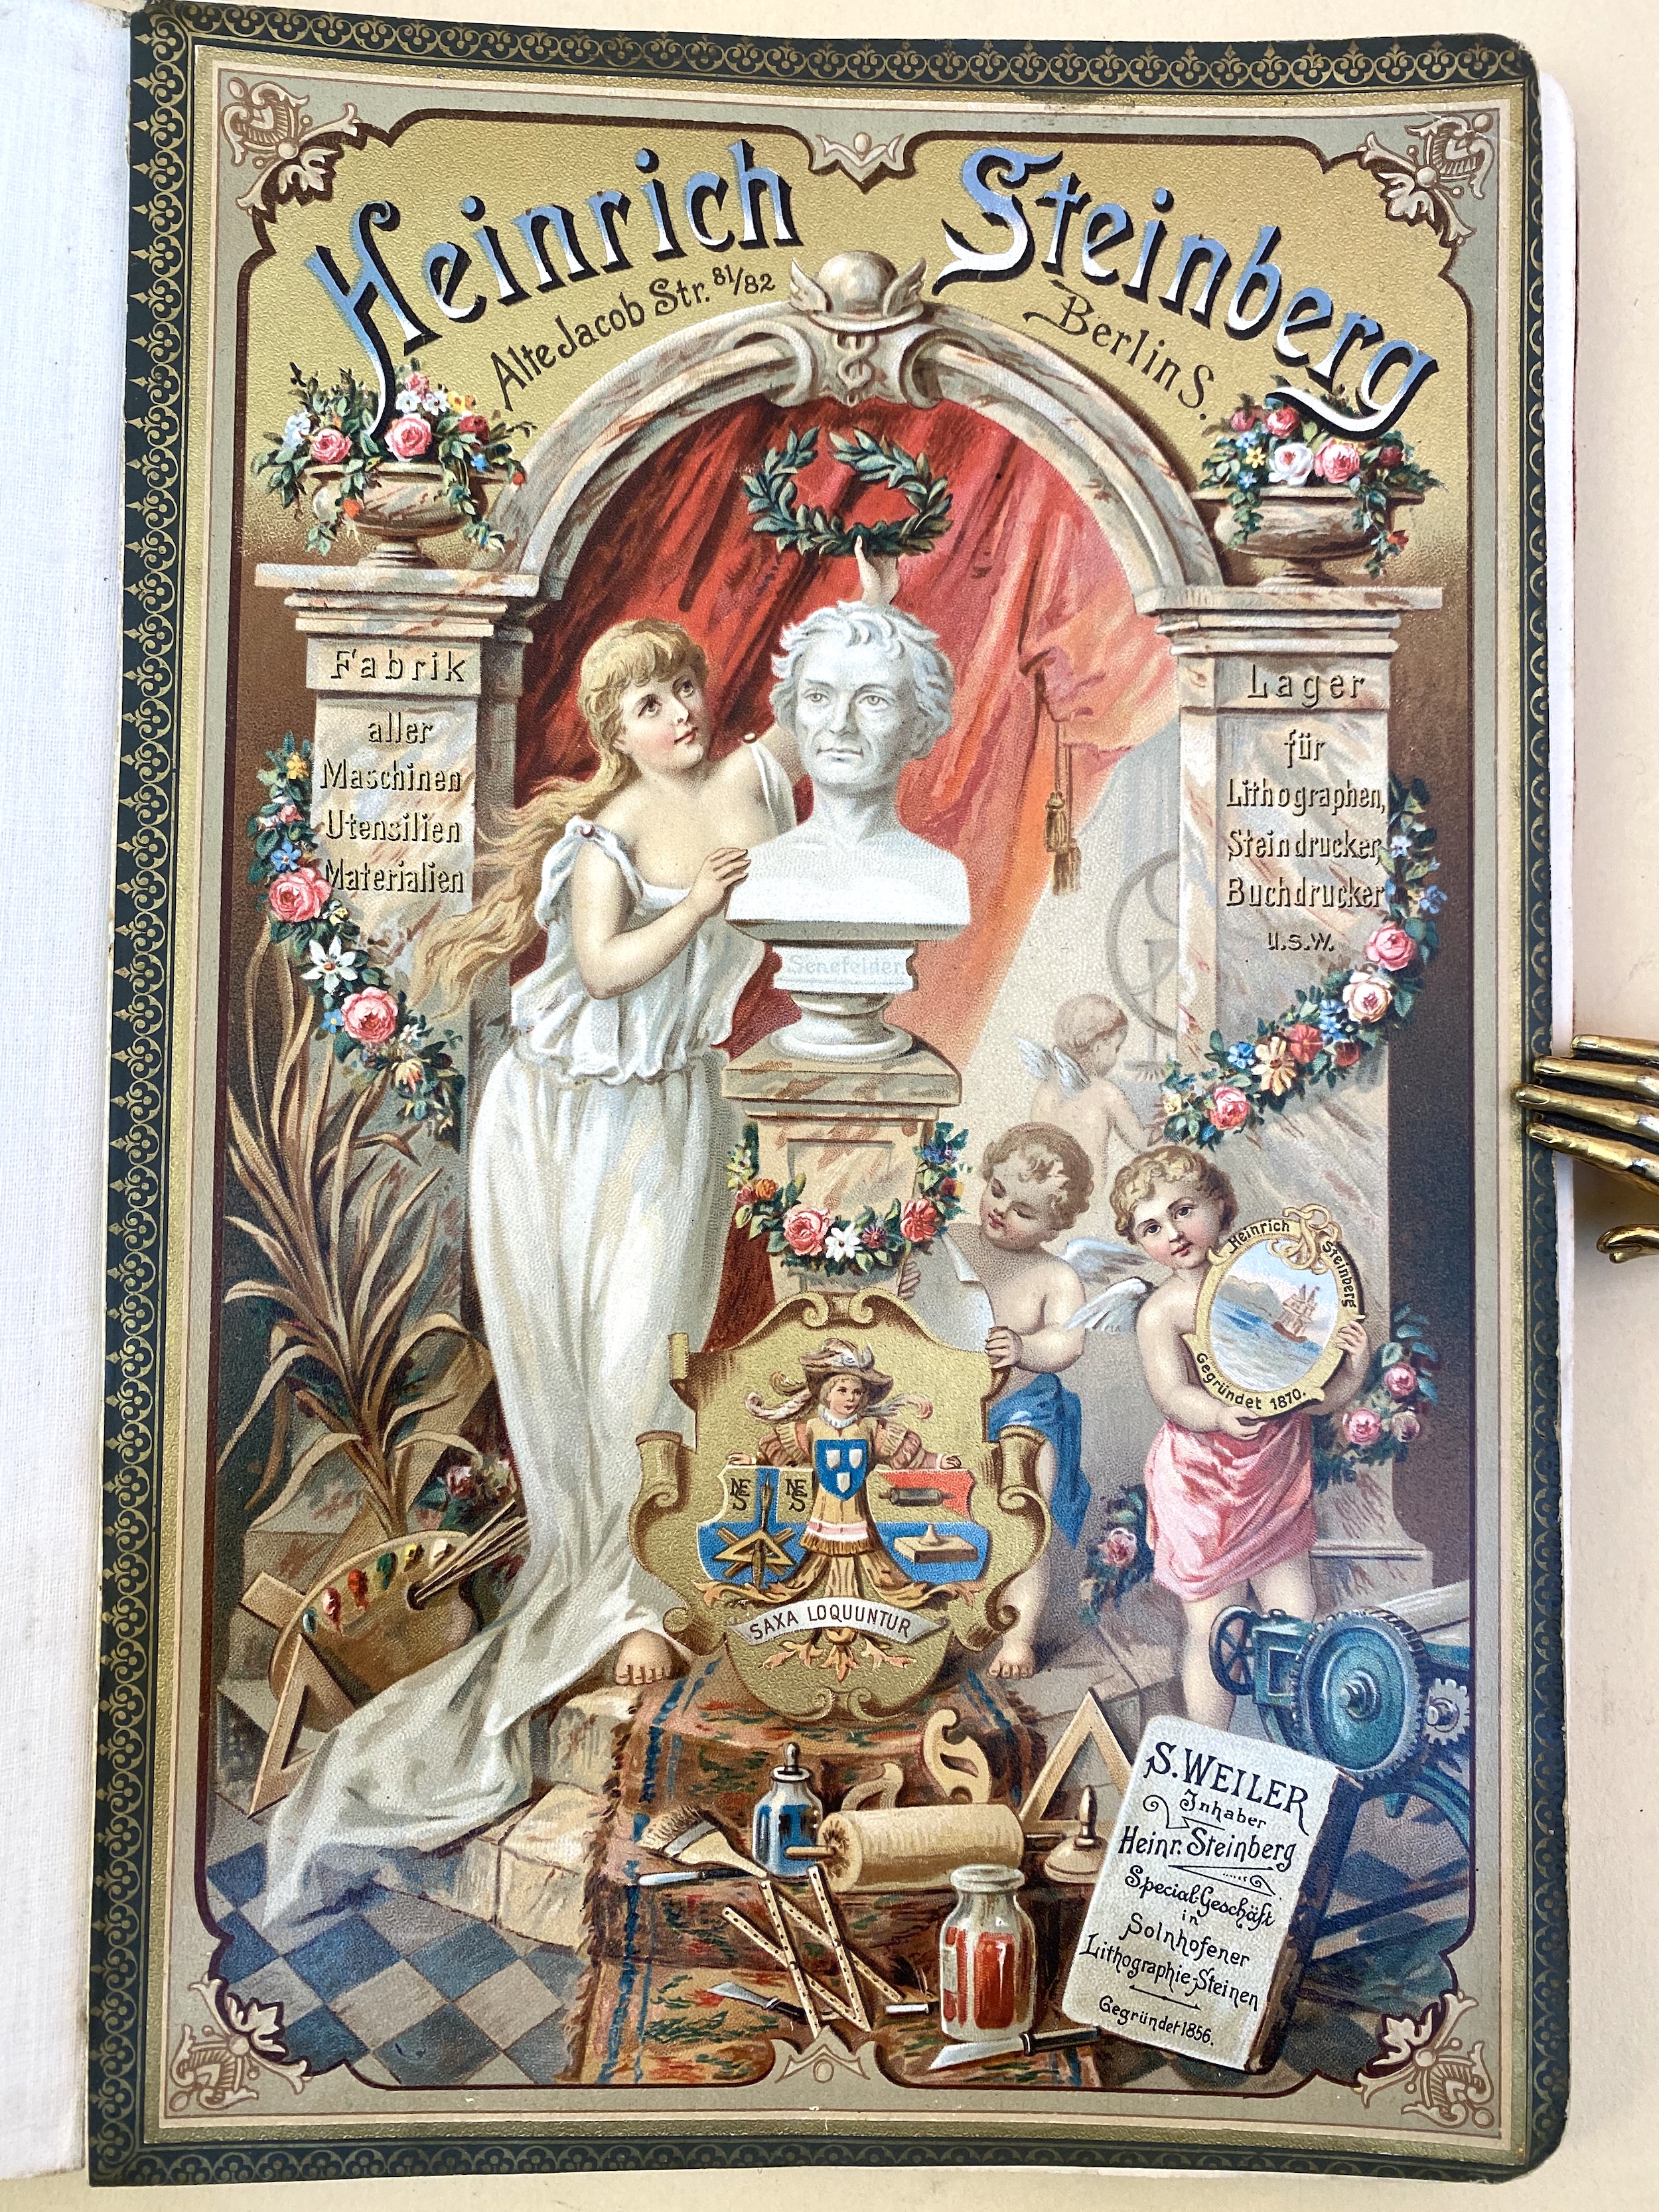 The cover of Heinrich Steinberg's 1891 catalogue was masterpiece of technical chromolithographic technique and elaborate detail, printed in many colors including gold ink.